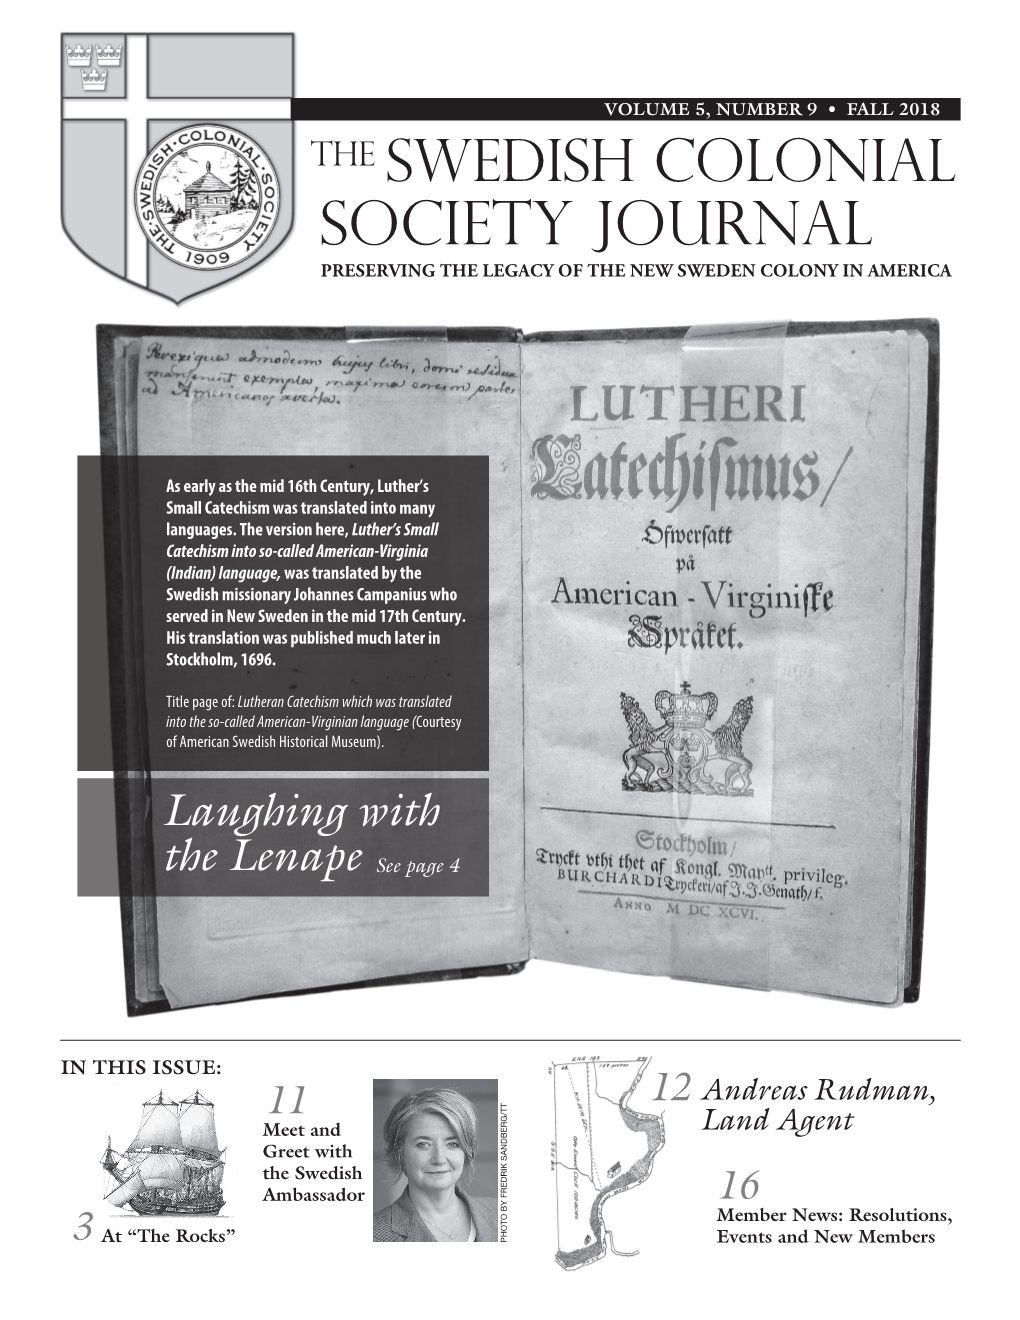 Society Journal PRESERVING the LEGACY of the NEW SWEDEN COLONY in AMERICA